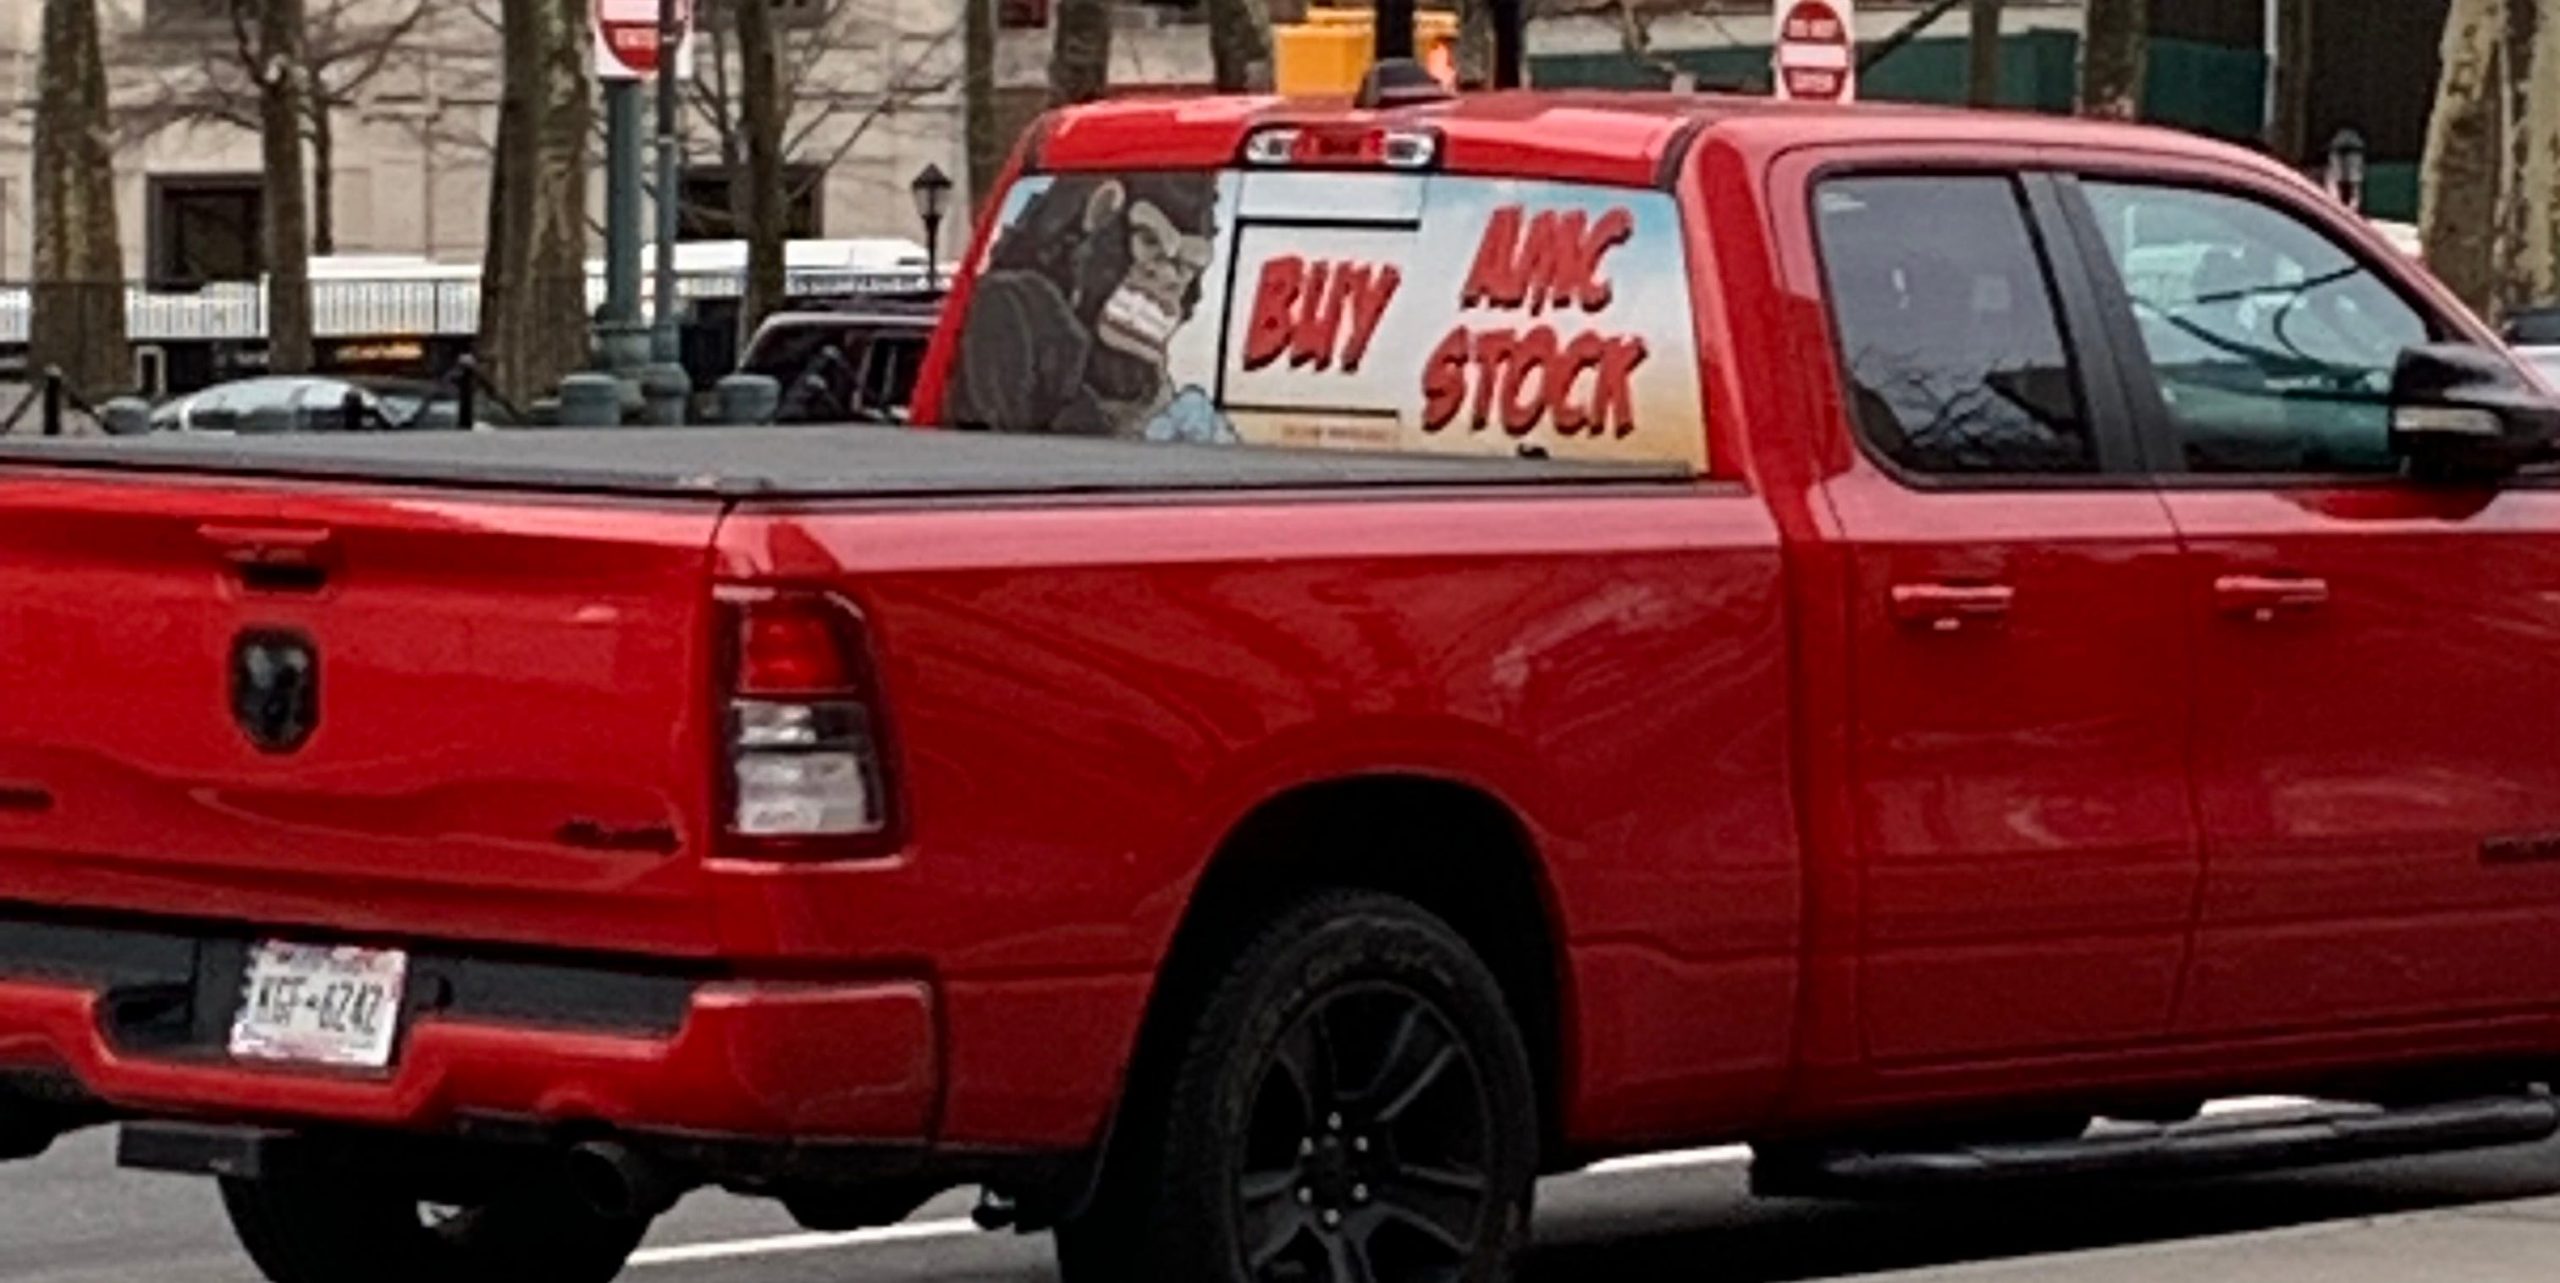 "Buy AMC stock" plastered on red truck driving around Tillary Street in Downtown Brooklyn